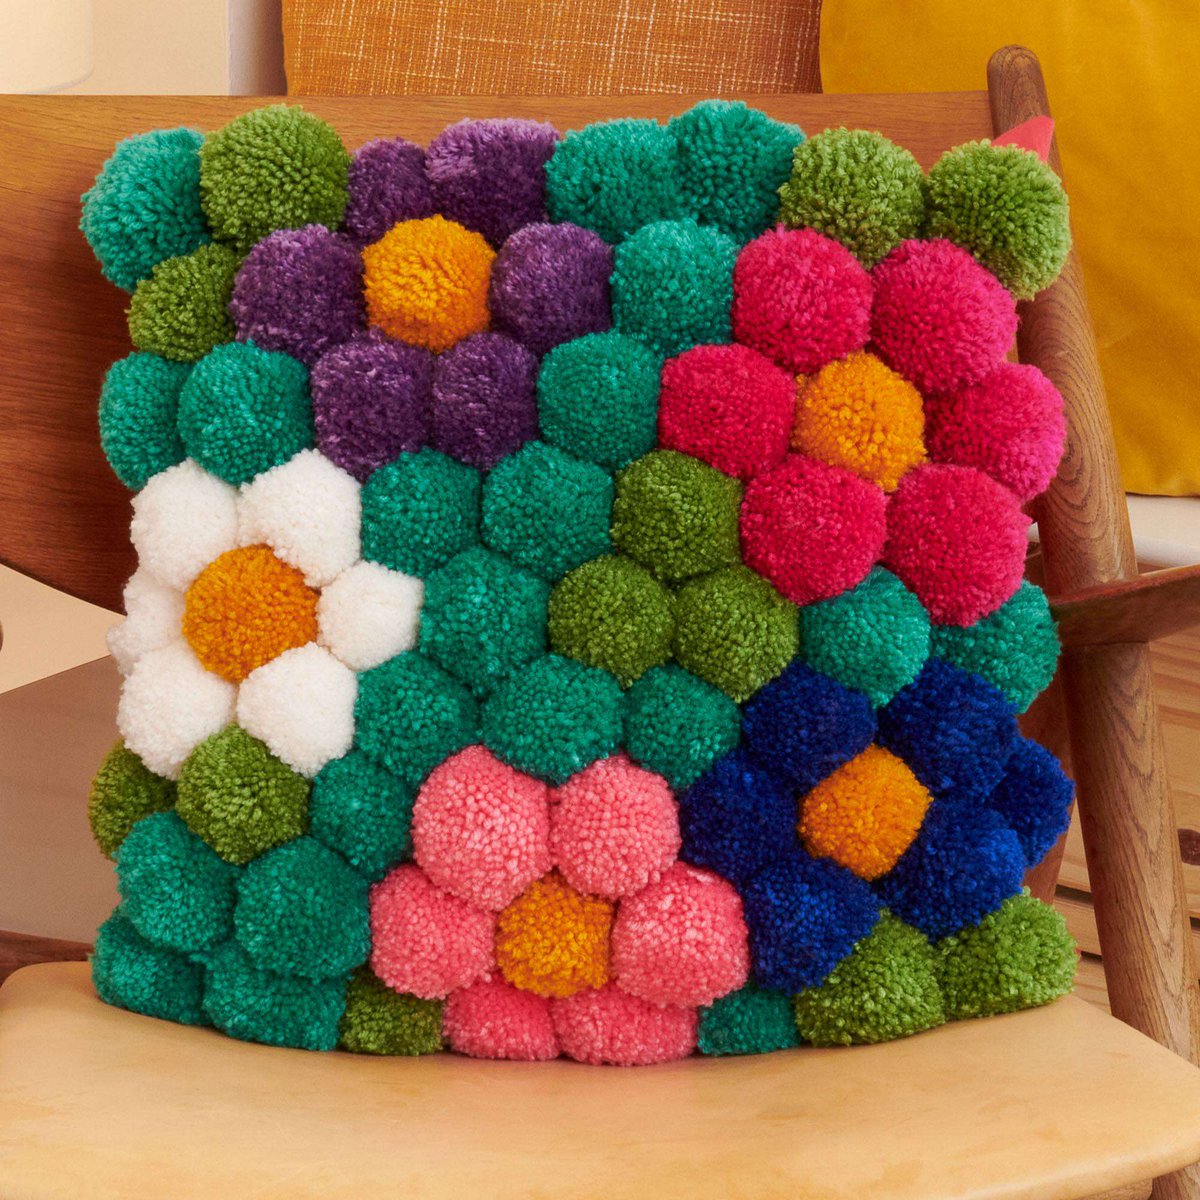 Explore a world of color with this inspired craft pillow that features pompoms! You can easily update your couch with this whimsical accent! 😍#crafts #yarncrafts #yarnspo rb.gy/707og